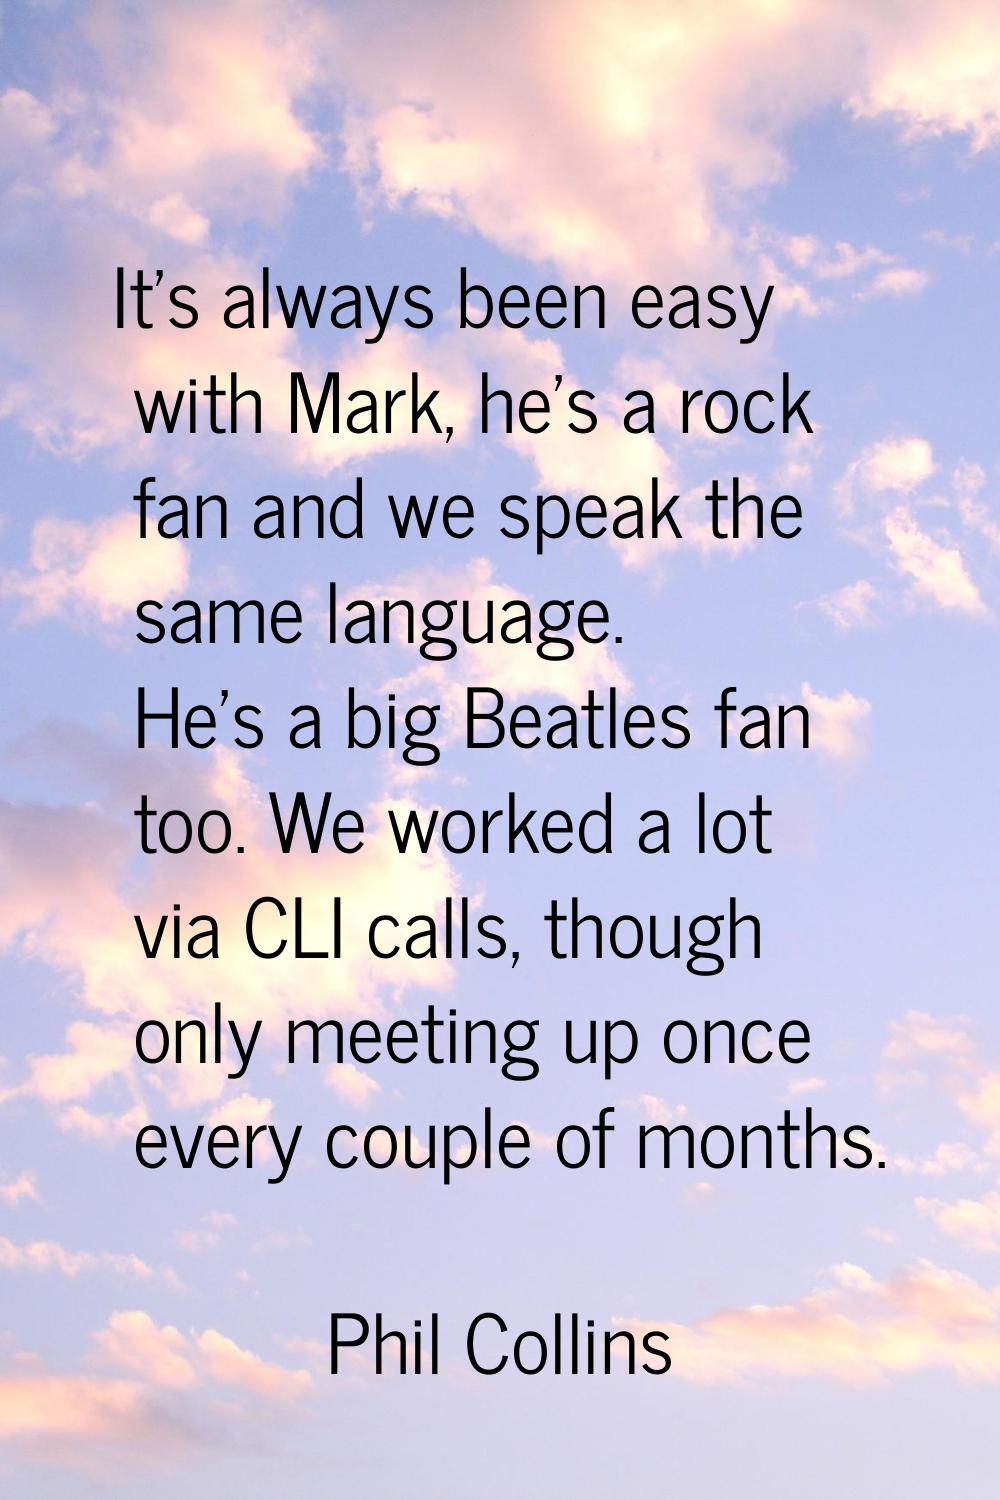 It's always been easy with Mark, he's a rock fan and we speak the same language. He's a big Beatles